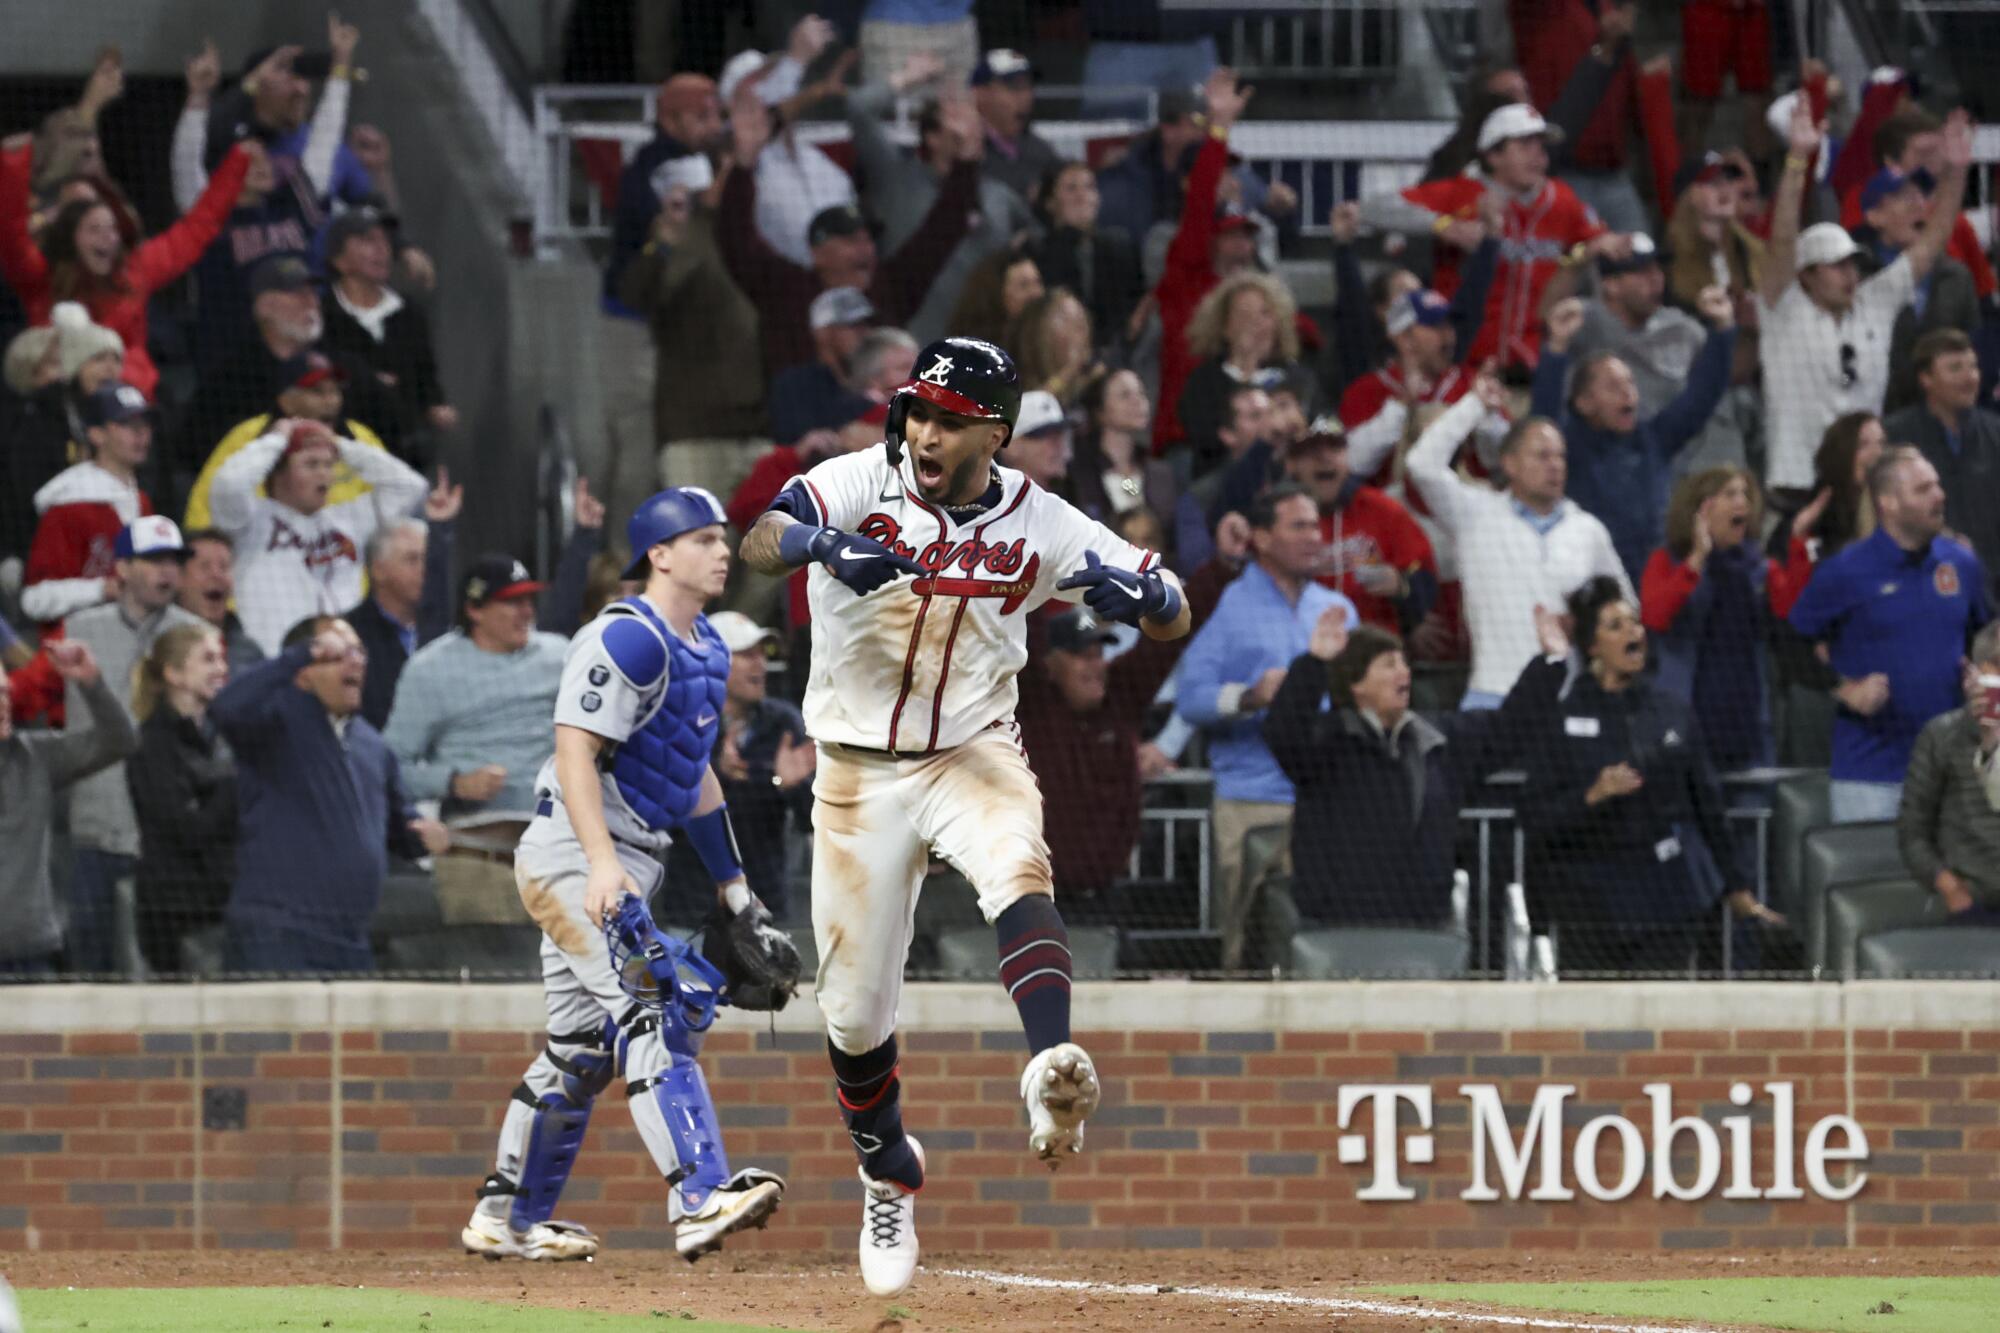 Eddie Rosario celebrates after hitting a walk-off single to defeat the Dodgers 5-4.